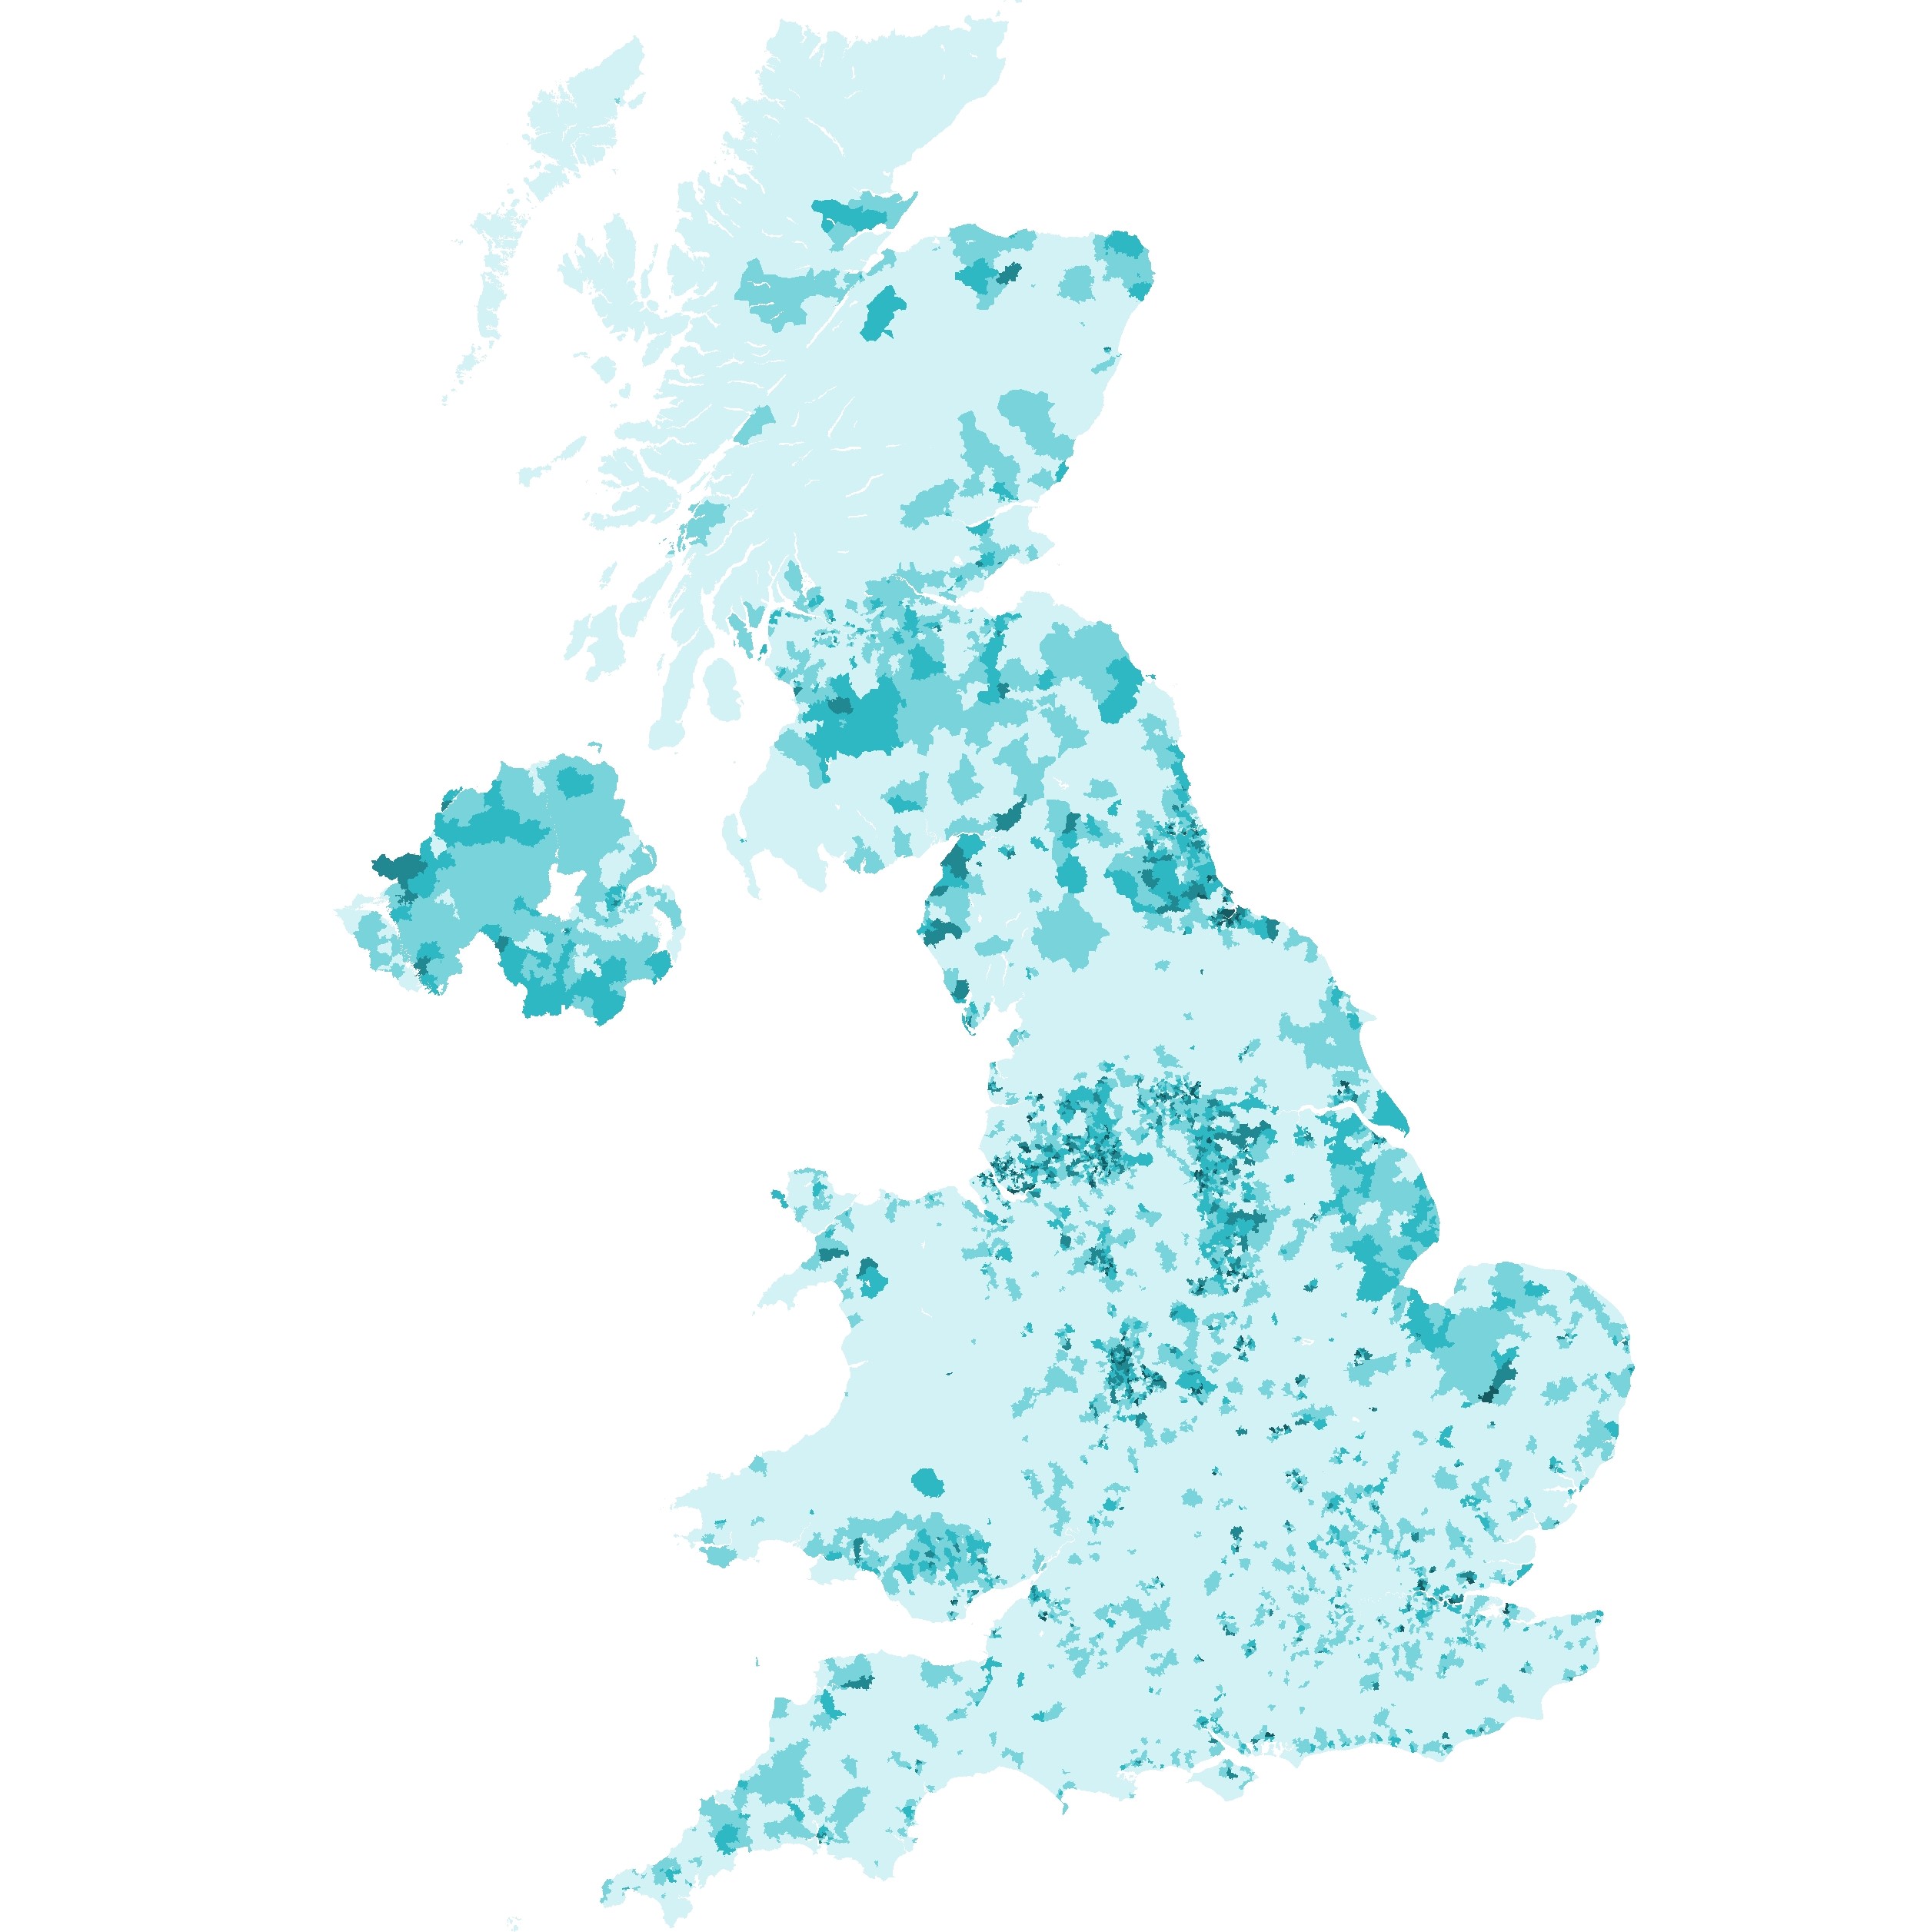 This heatmap of the Uk shows mostly pale colour but lots of small spots of the segment especially in the Midlands and North West, whilst the whole South of England has few patches.